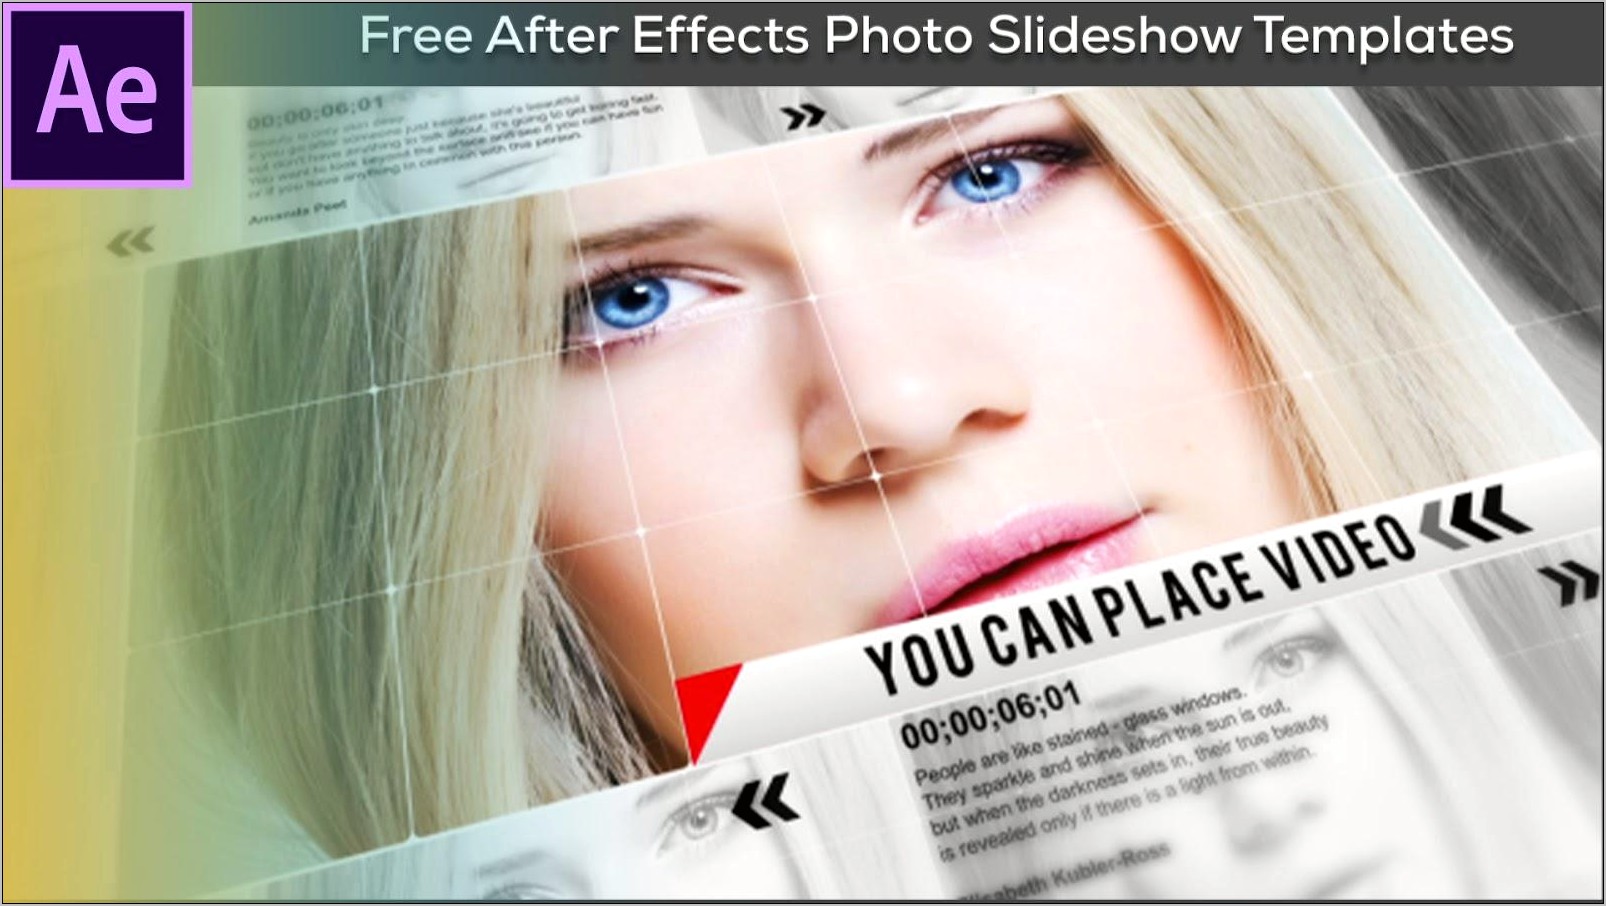 After Effects Template Free Download Slideshow